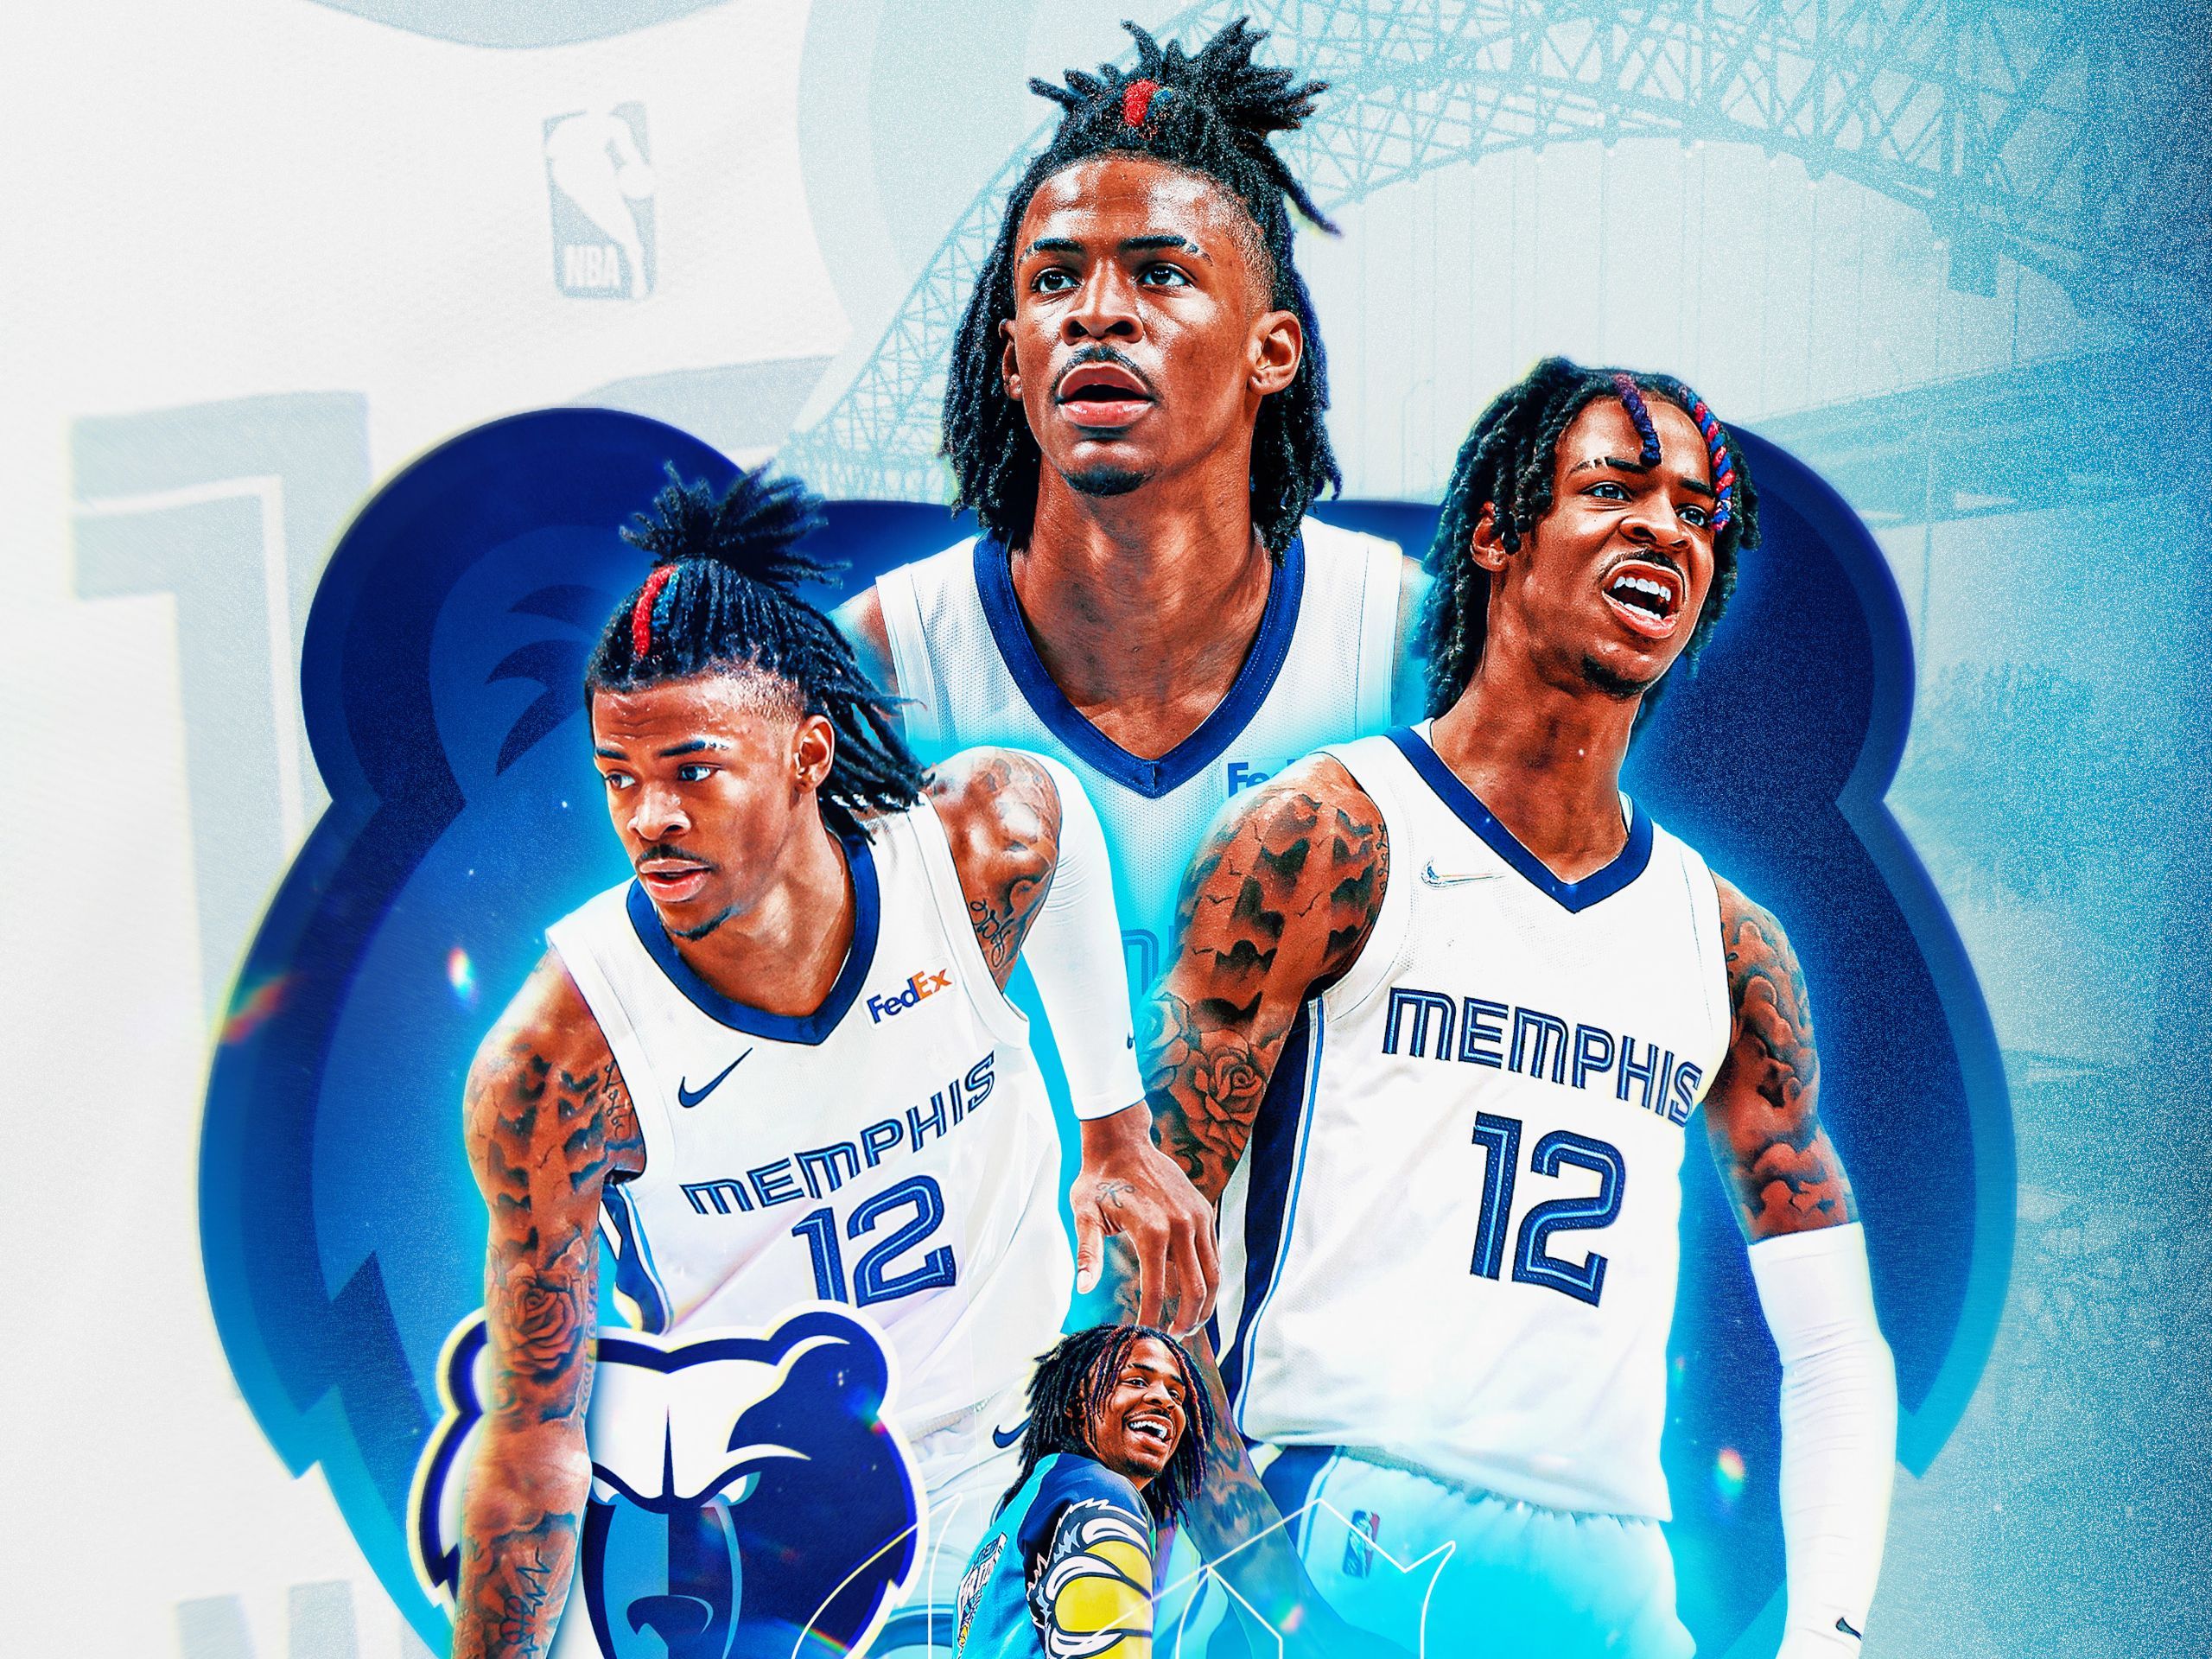 The Grizzlies are the NBA's most improved team, and Ja Morant is the reason why - Ja Morant